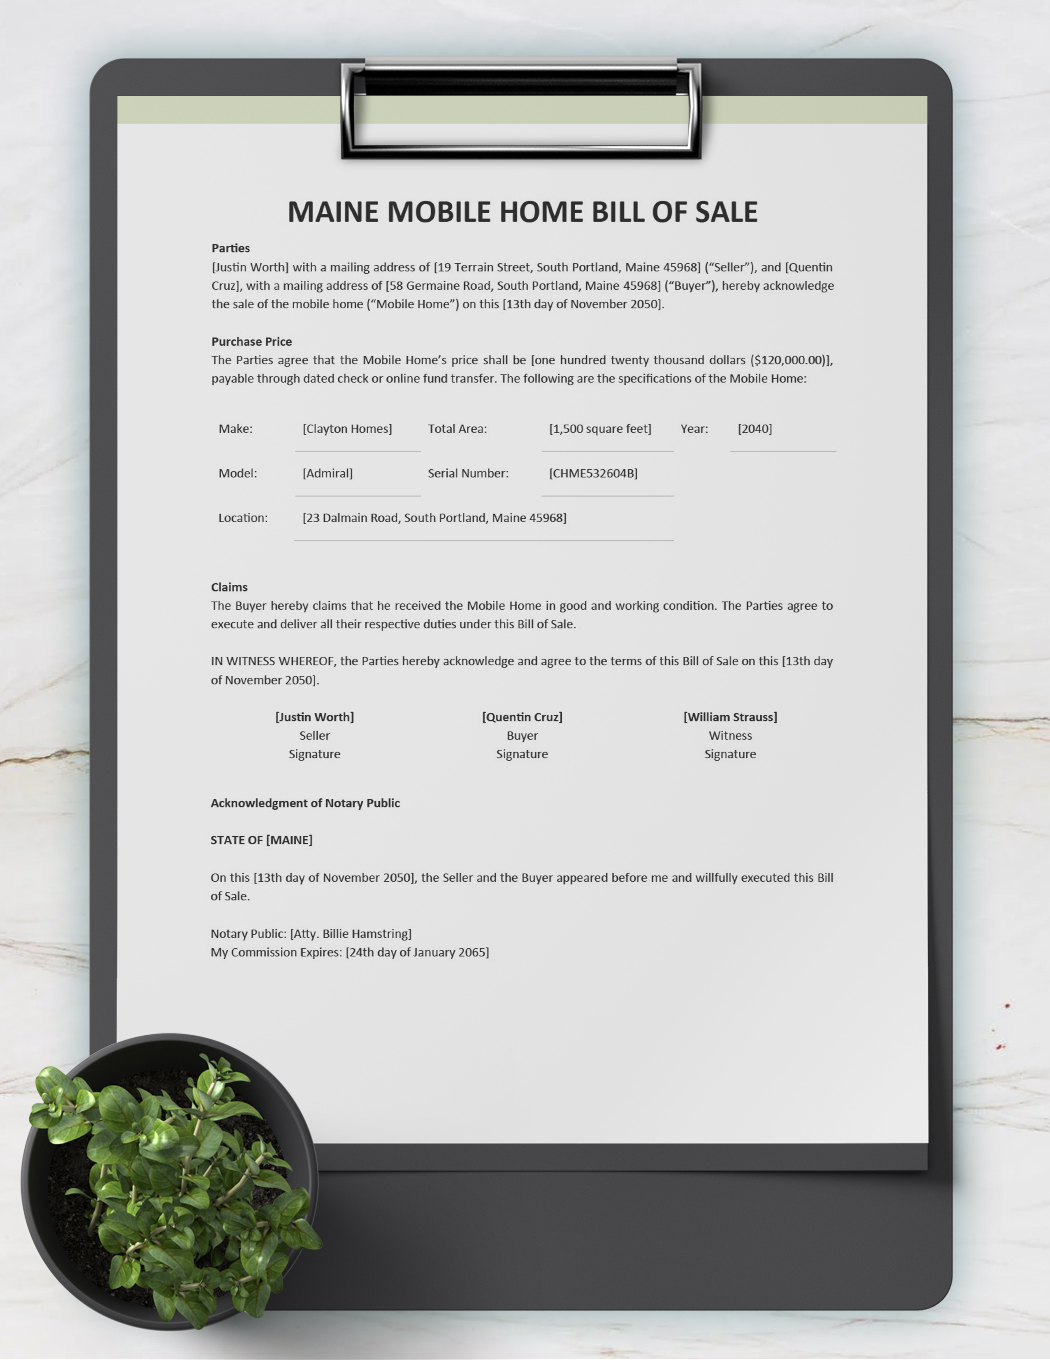 Maine Mobile Home Bill of Sale Template